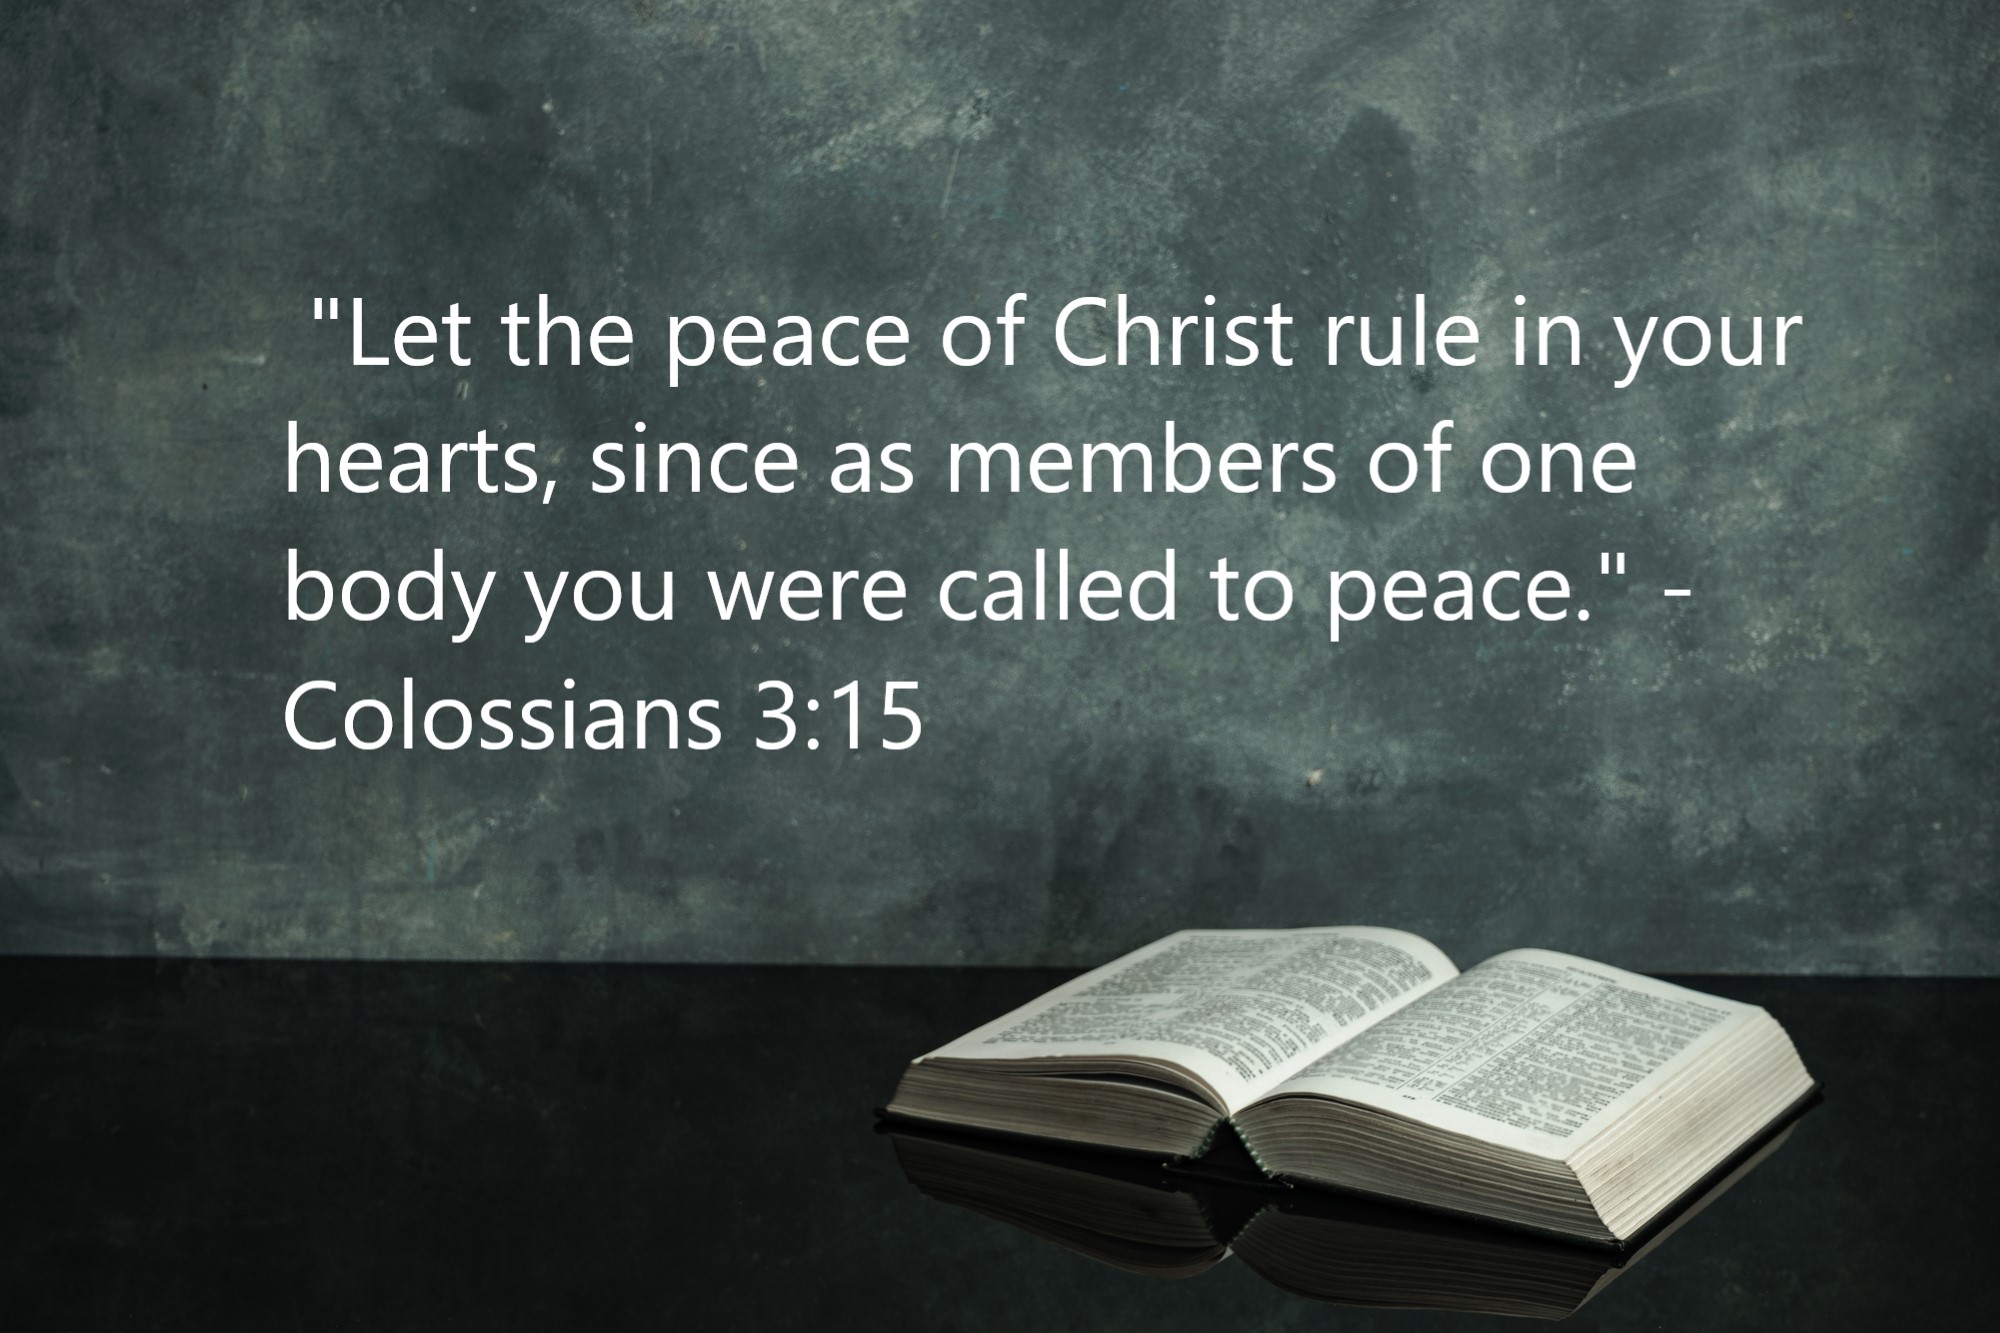 "Let the peace of Christ rule in your hearts, since as members of one body you were called to peace." - Colossians 3:15